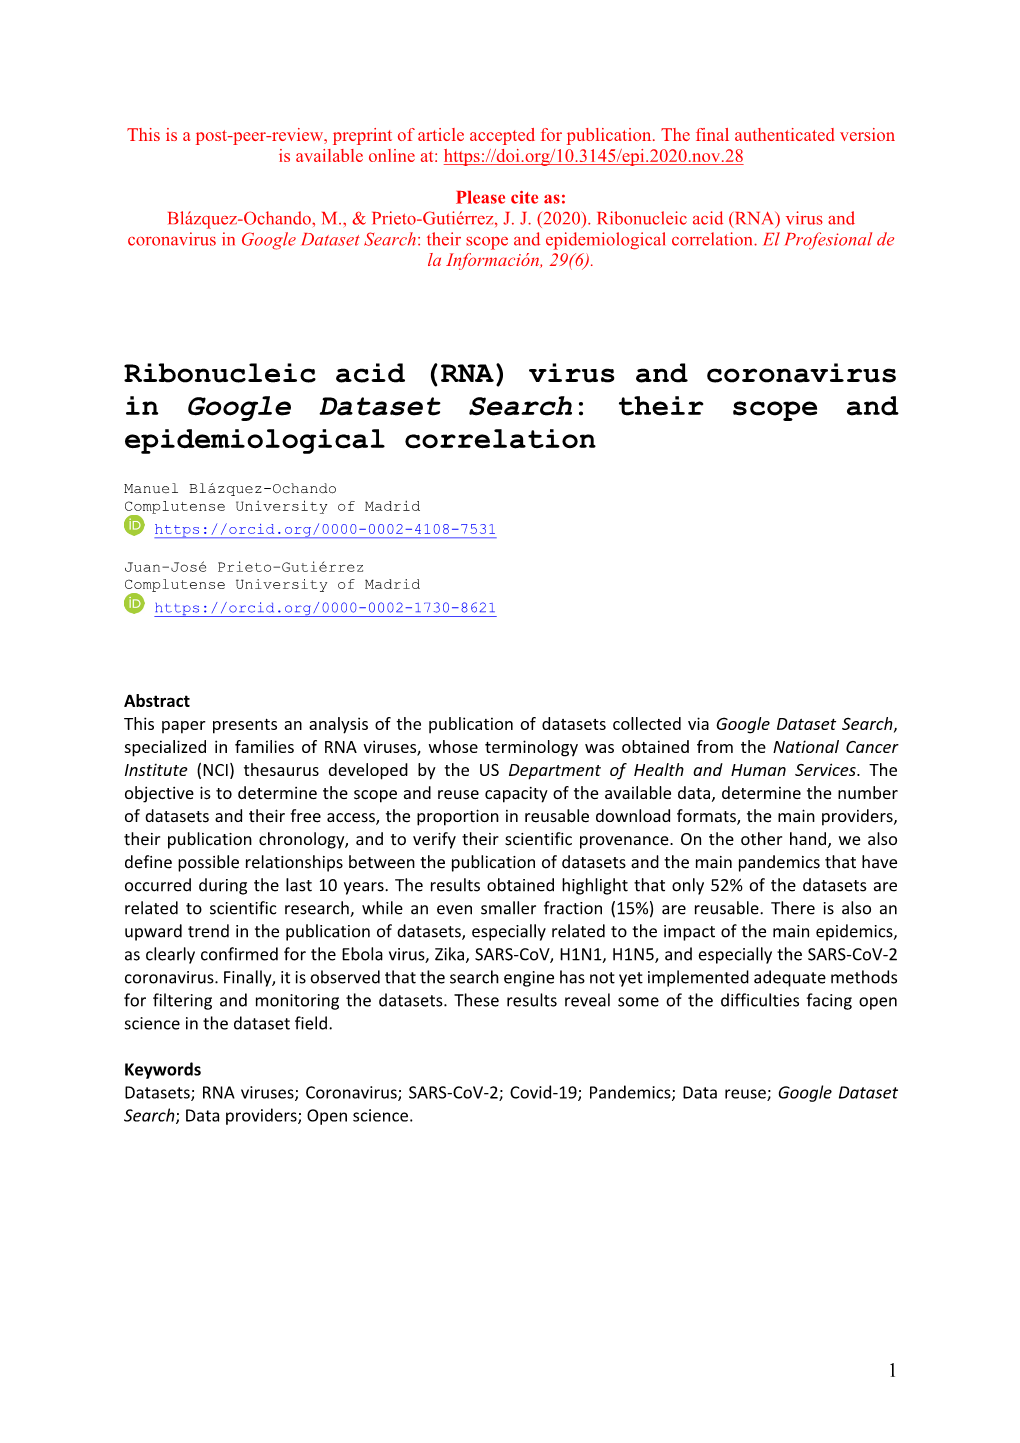 (RNA) Virus and Coronavirus in Google Dataset Search: Their Scope and Epidemiological Correlation